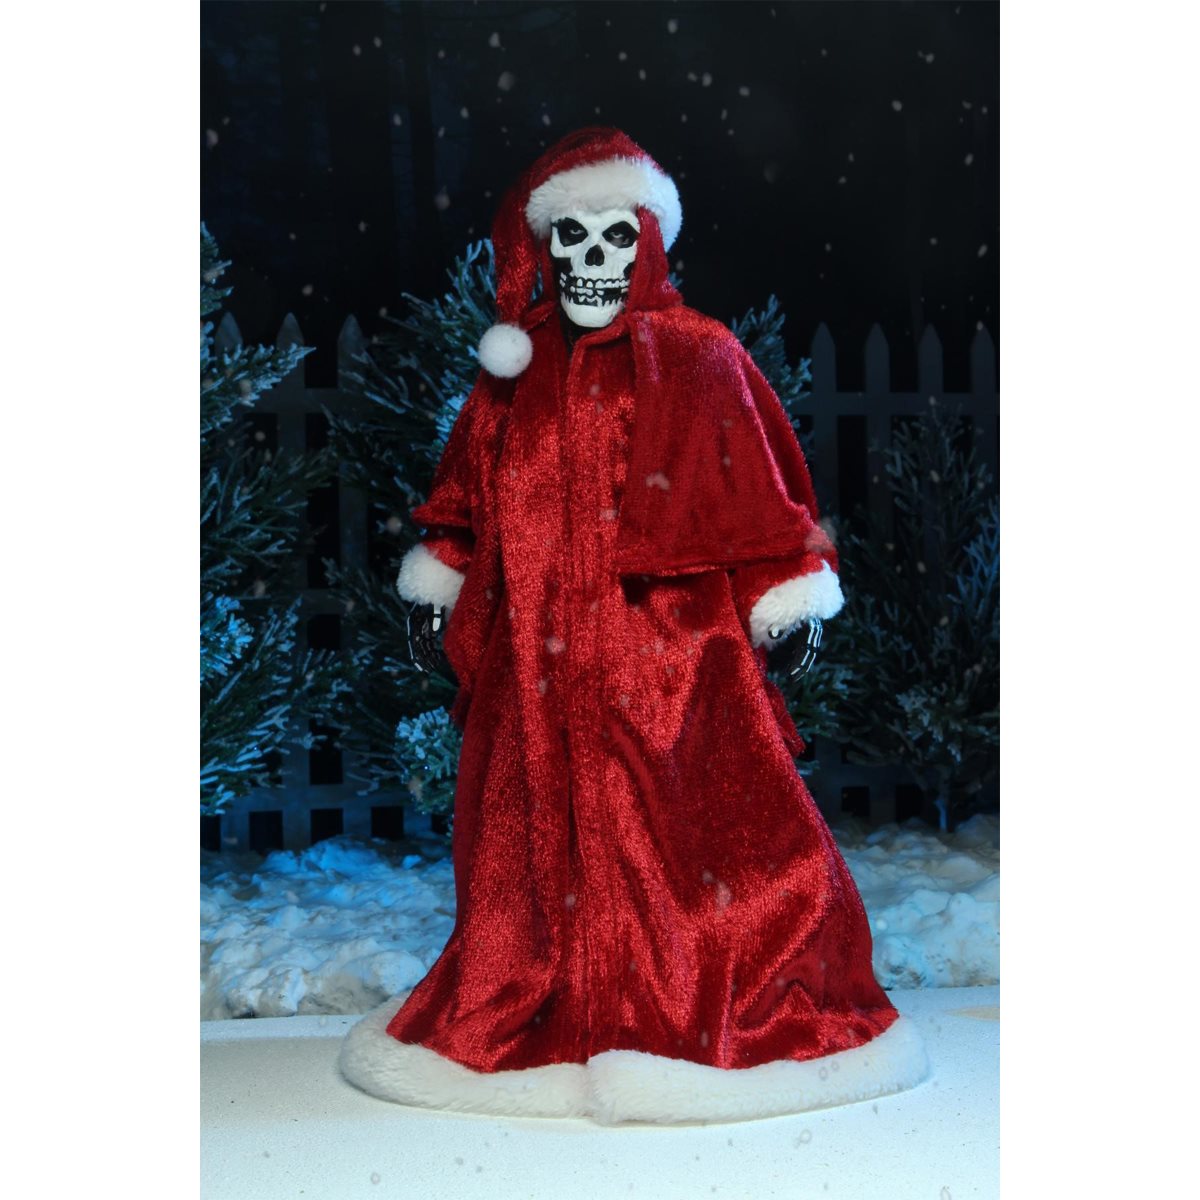 HOLIDAY FIEND Neca THE MISFITS 8" Inch CLOTHED 2020 FIGURE IN STOCK * 